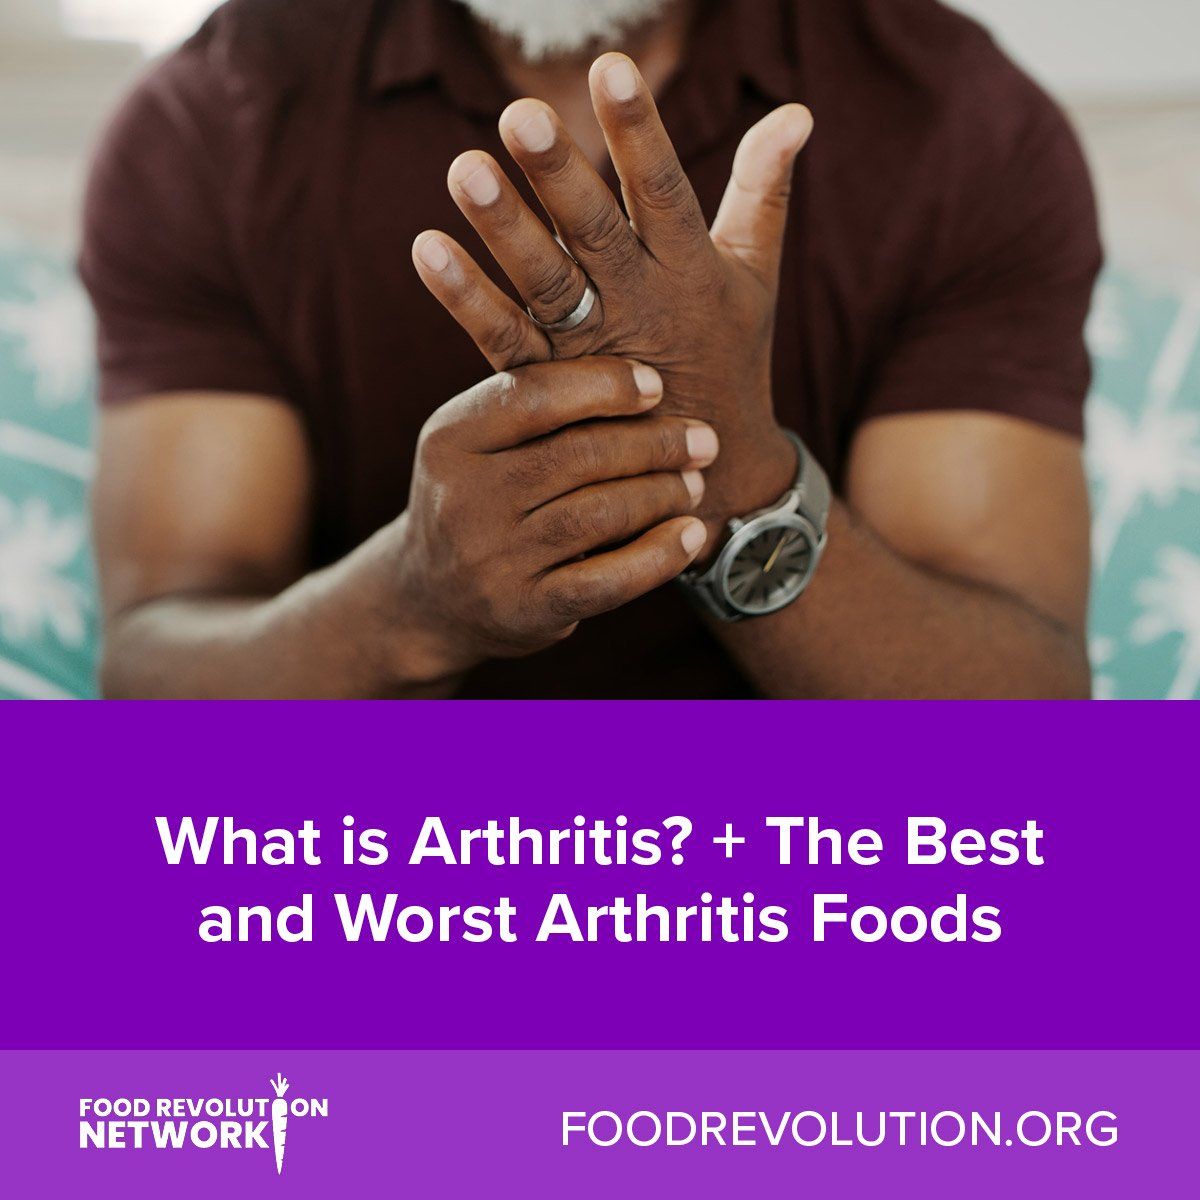 What is Arthritis? + The Best and Worst Arthritis Foods